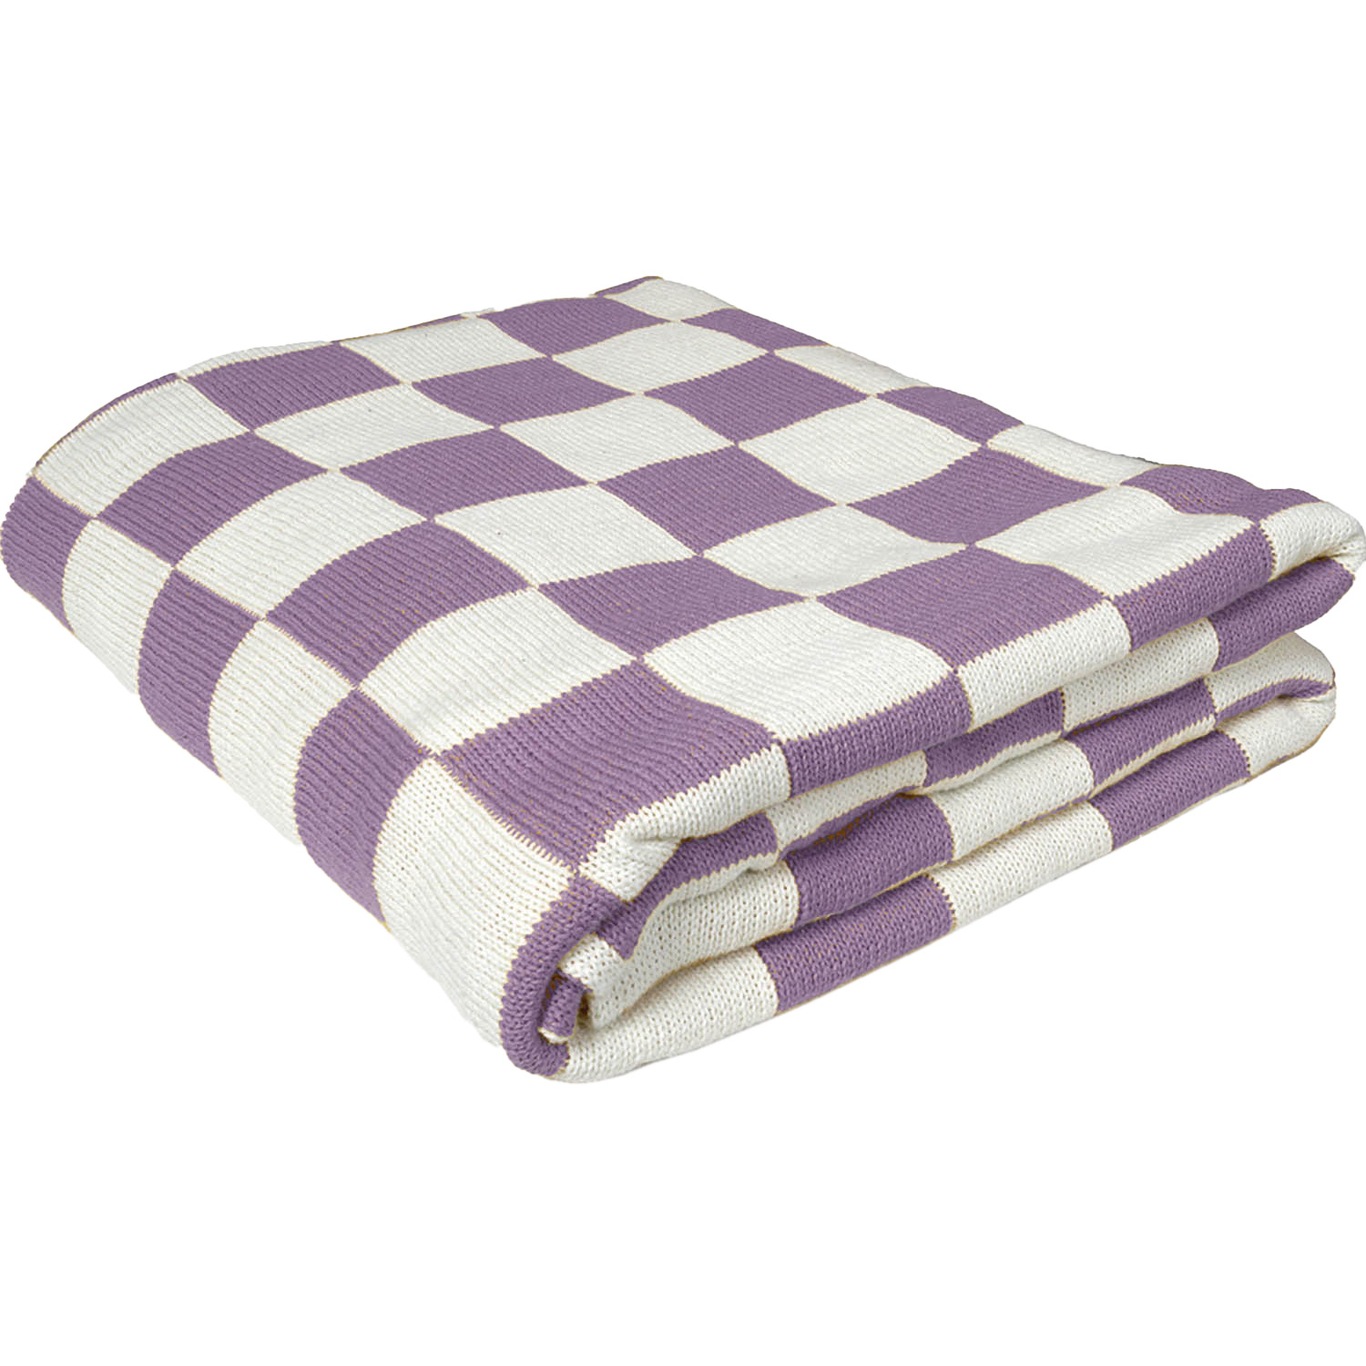 Knitted Check Throw 130x160 cm, Lilac